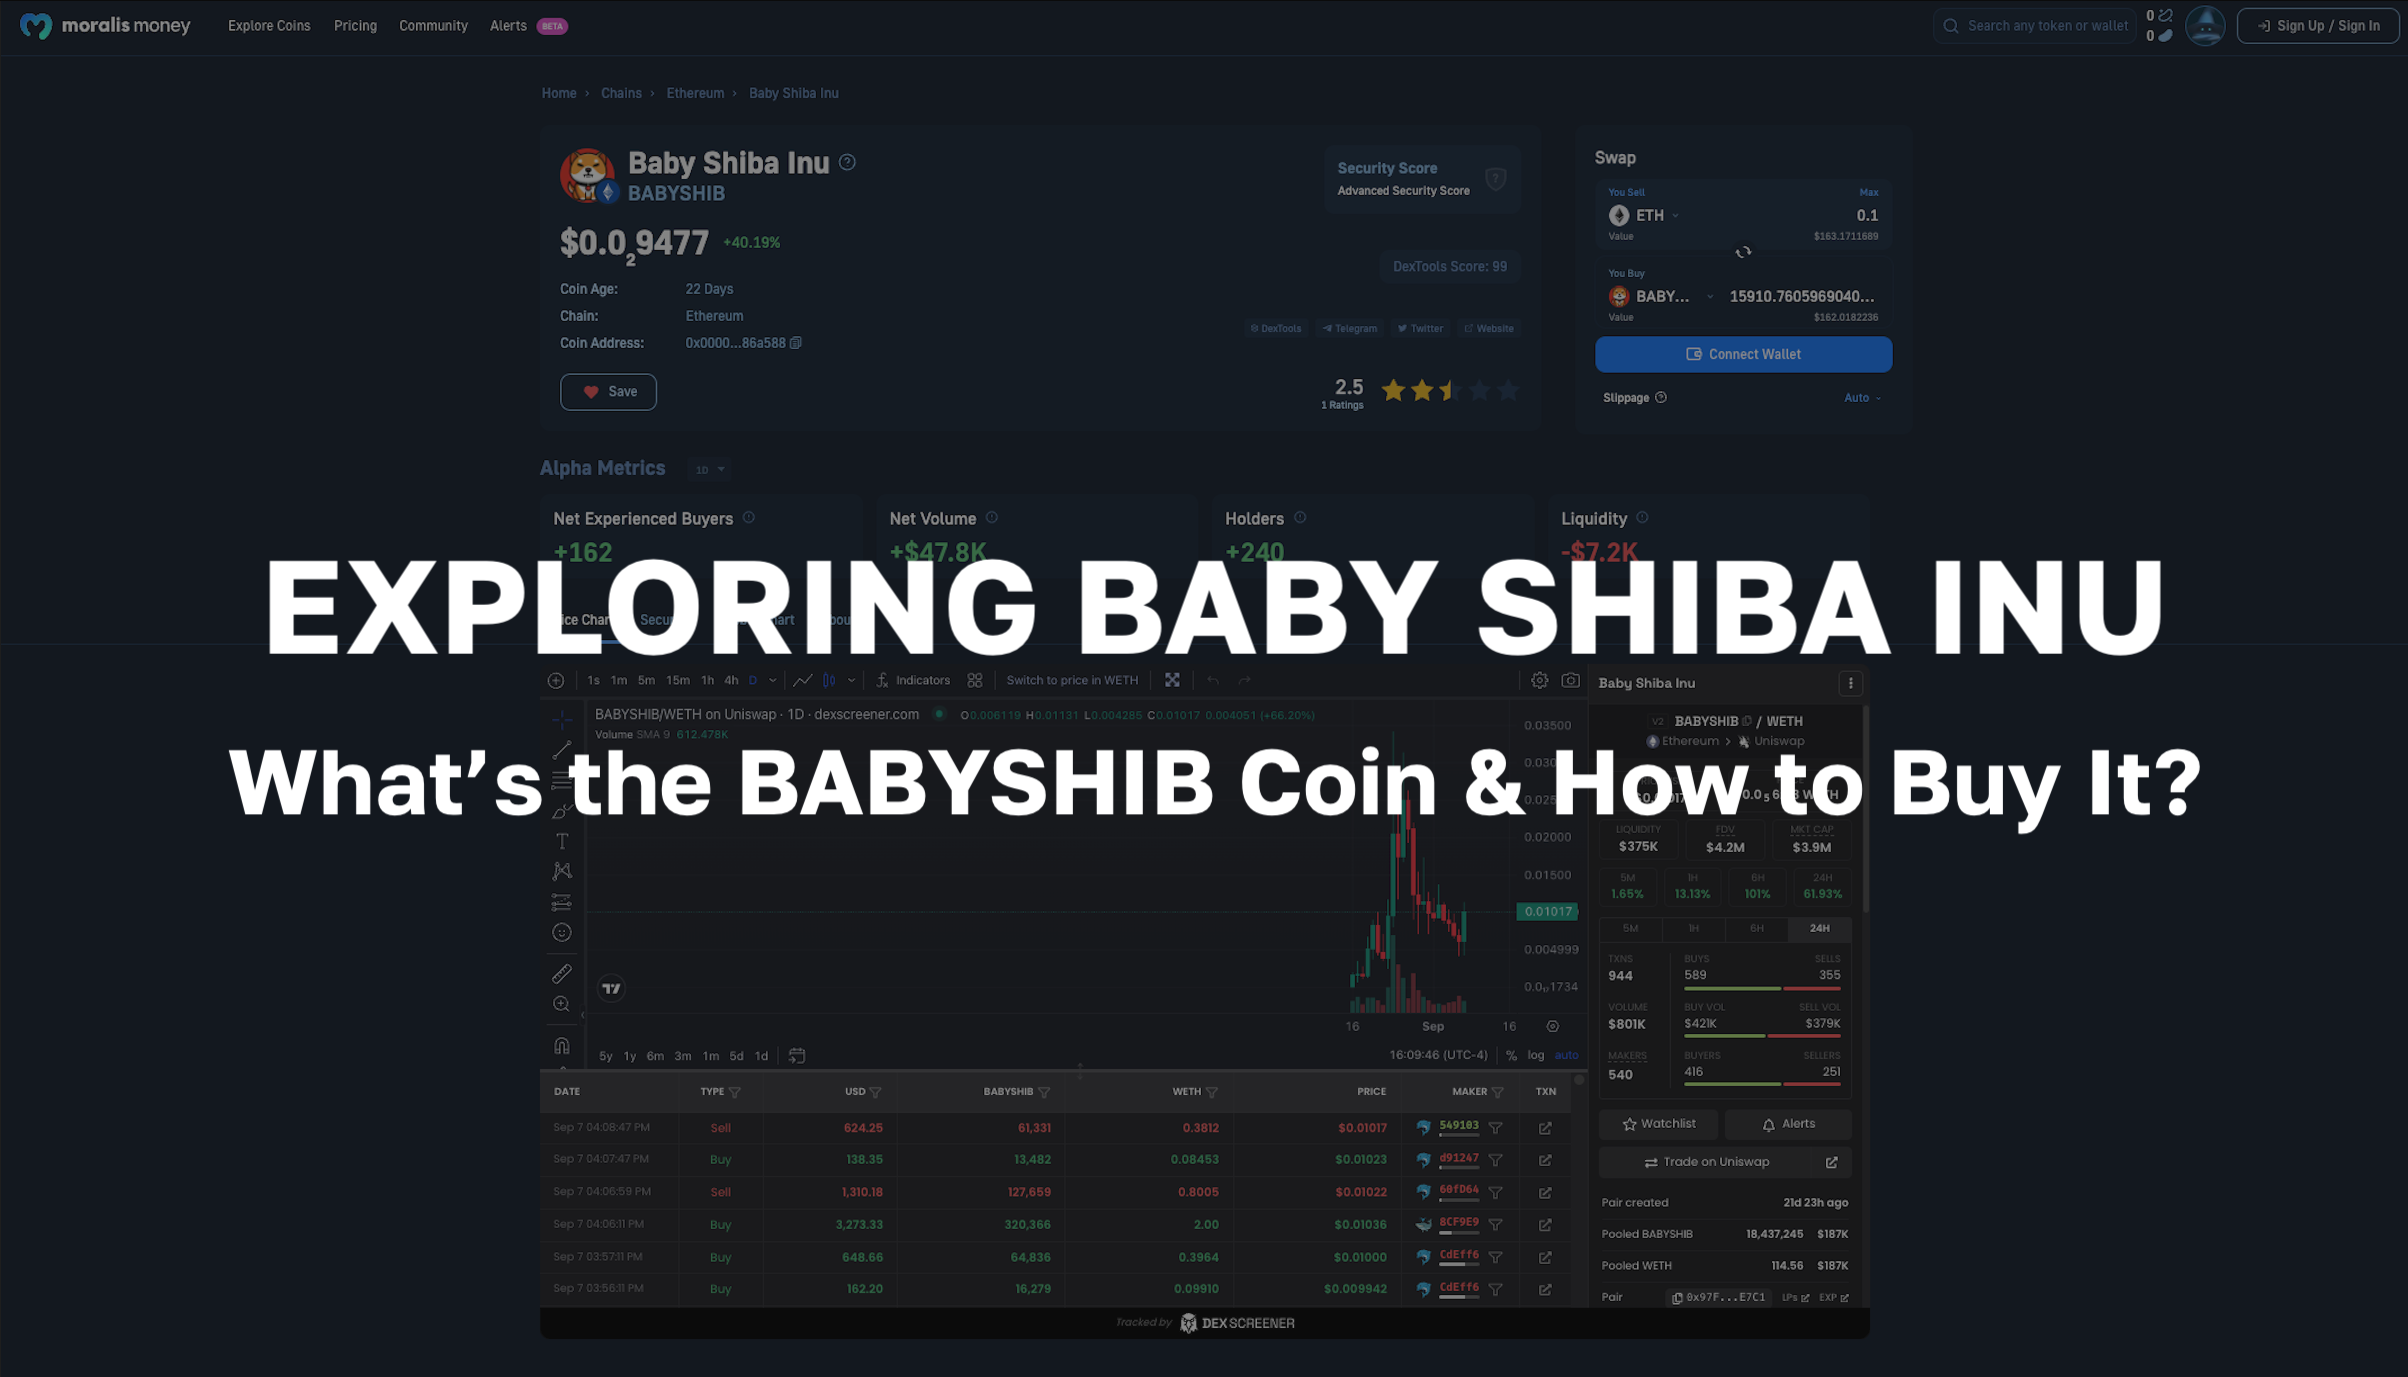 What is the Baby Shiba Inu Coin, and How Can You Buy BABYSHIB?